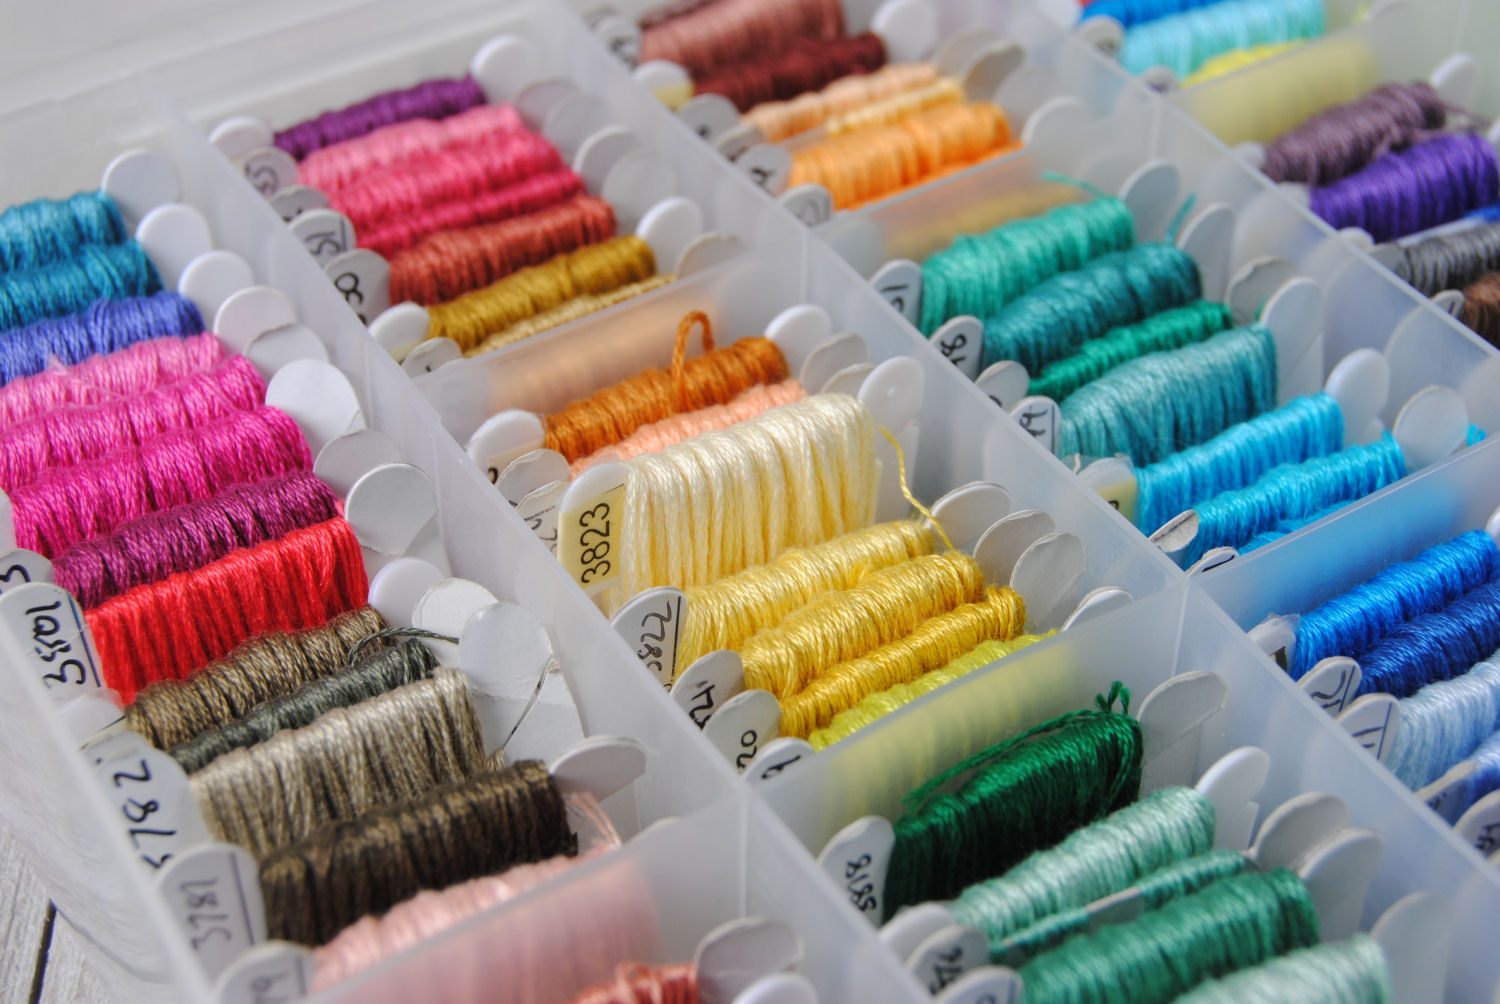 How to organize embroidery floss and wind on floss bobbins 